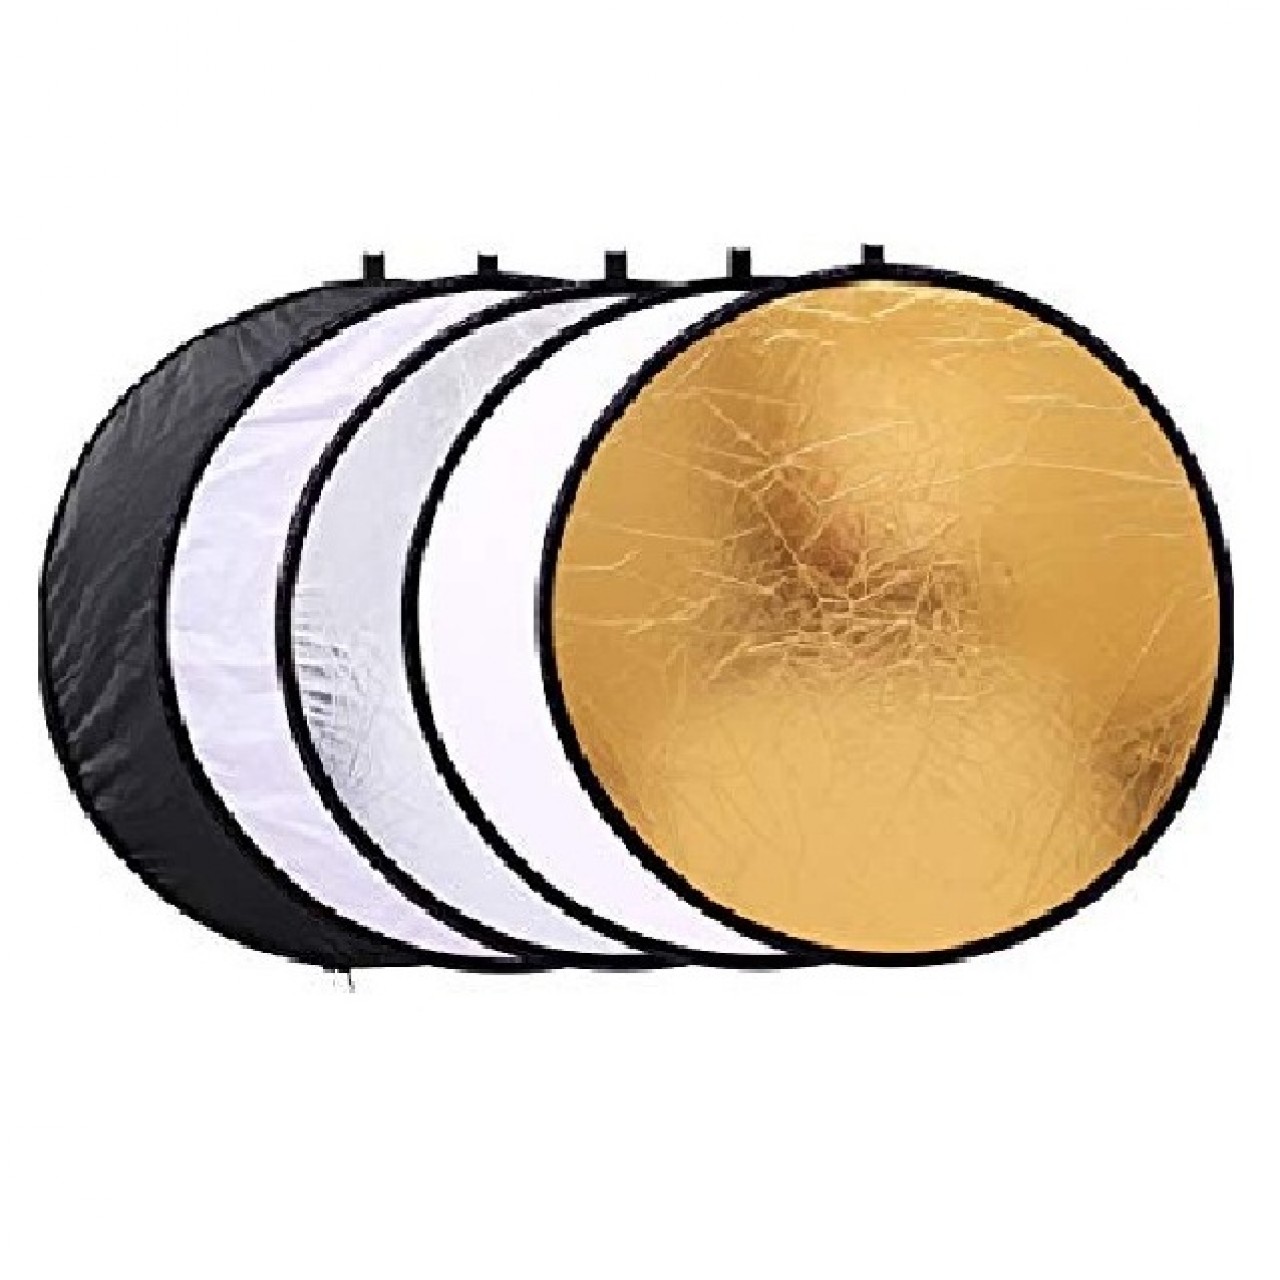 5 in 1 Collapsible Multi-Disc Reflector - 43”/110 cm